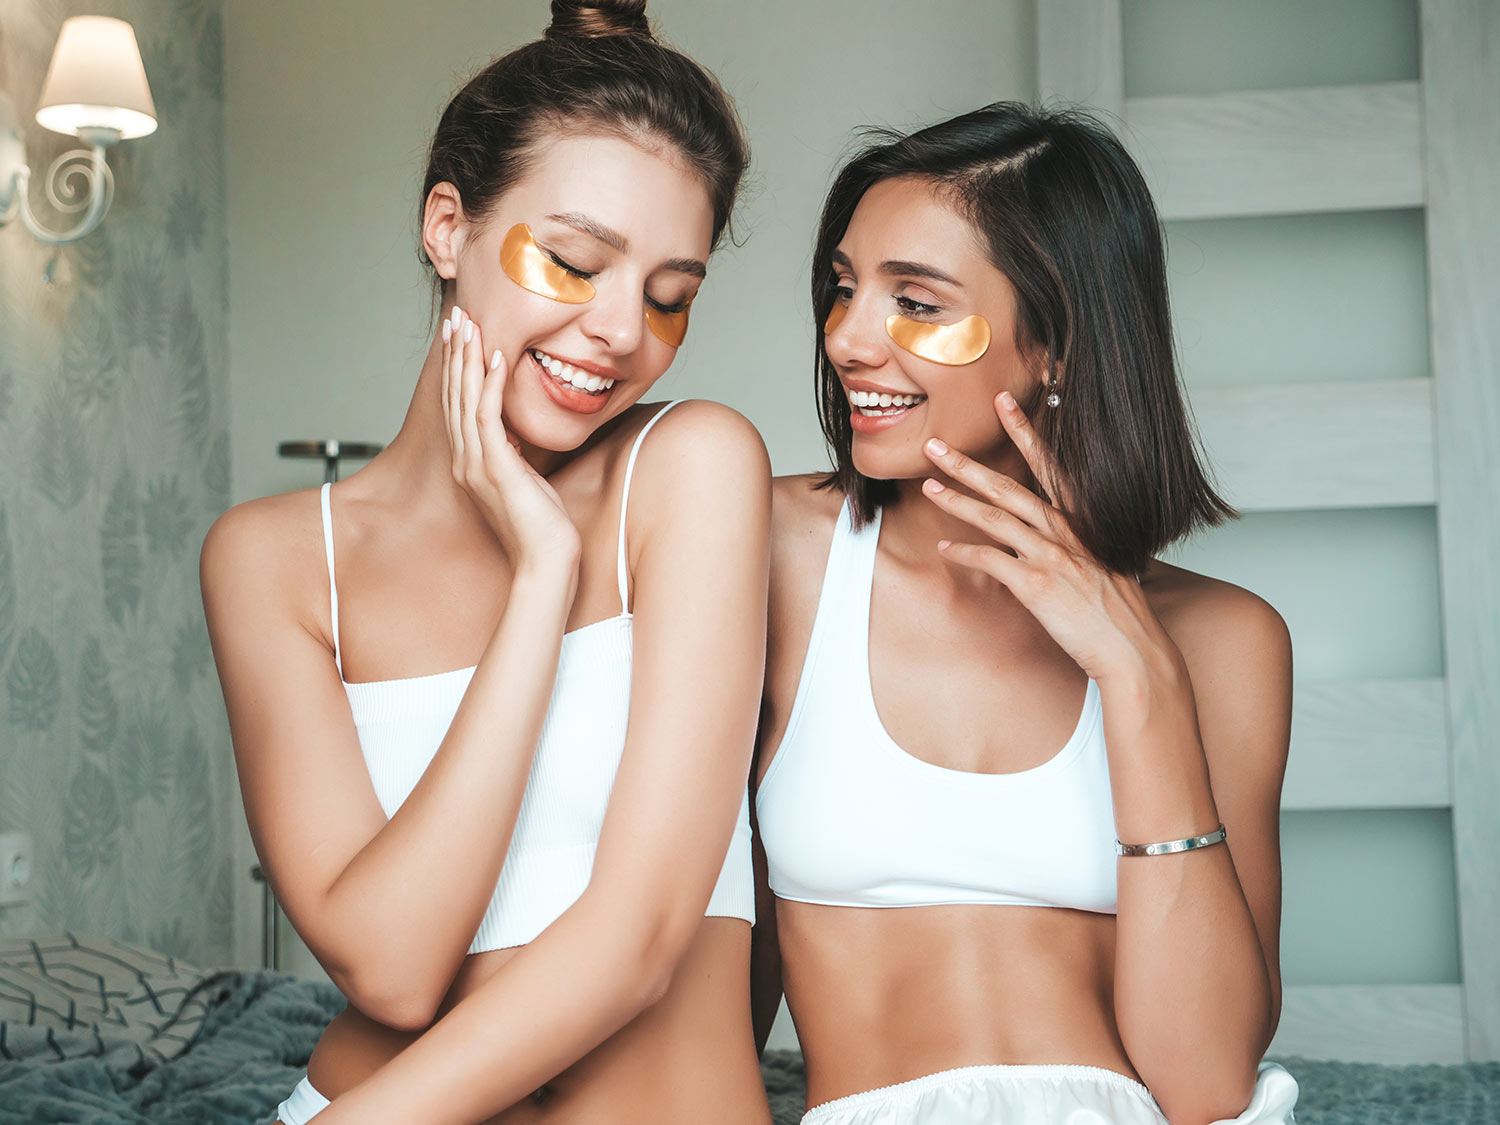 What You Need To Host An At-Home Spa Night With Close Friends